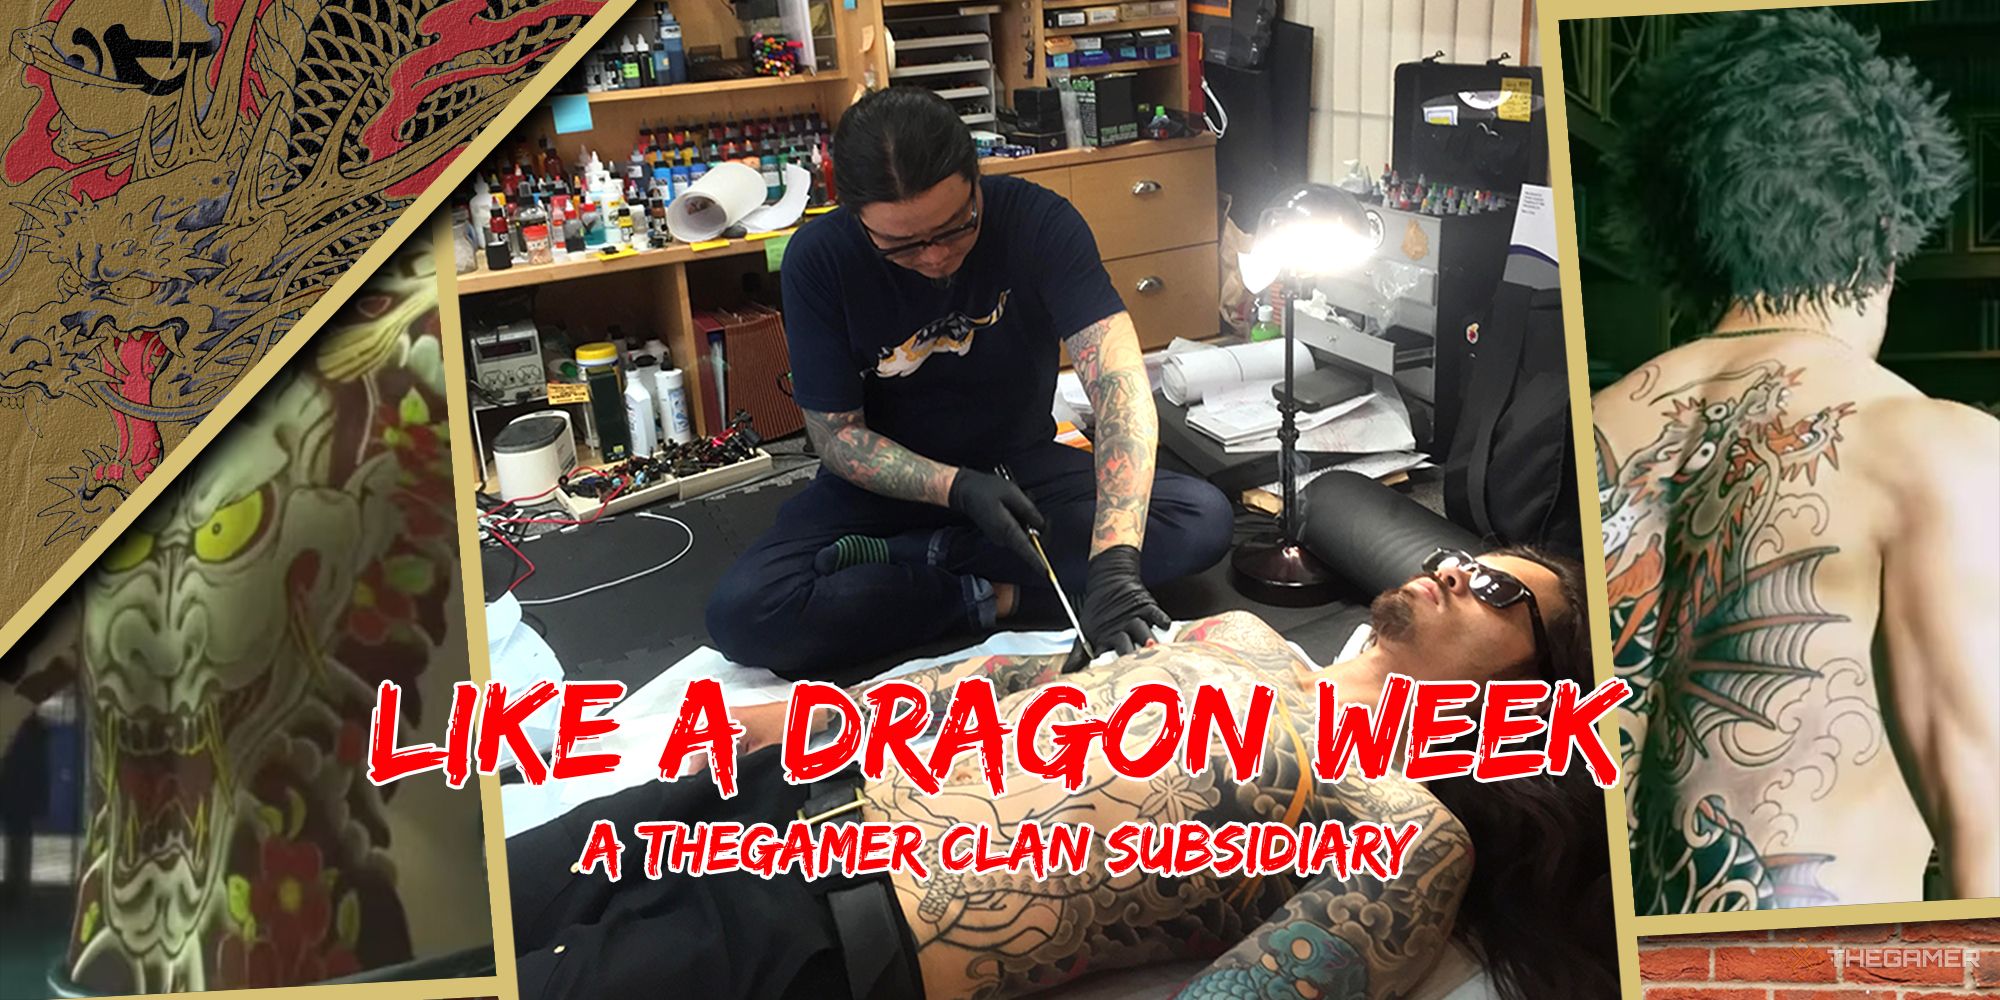 Horitomo tattooing a client with in-game images of the character tattoos beside it and the Like a Dragon Week text overlaid on top.